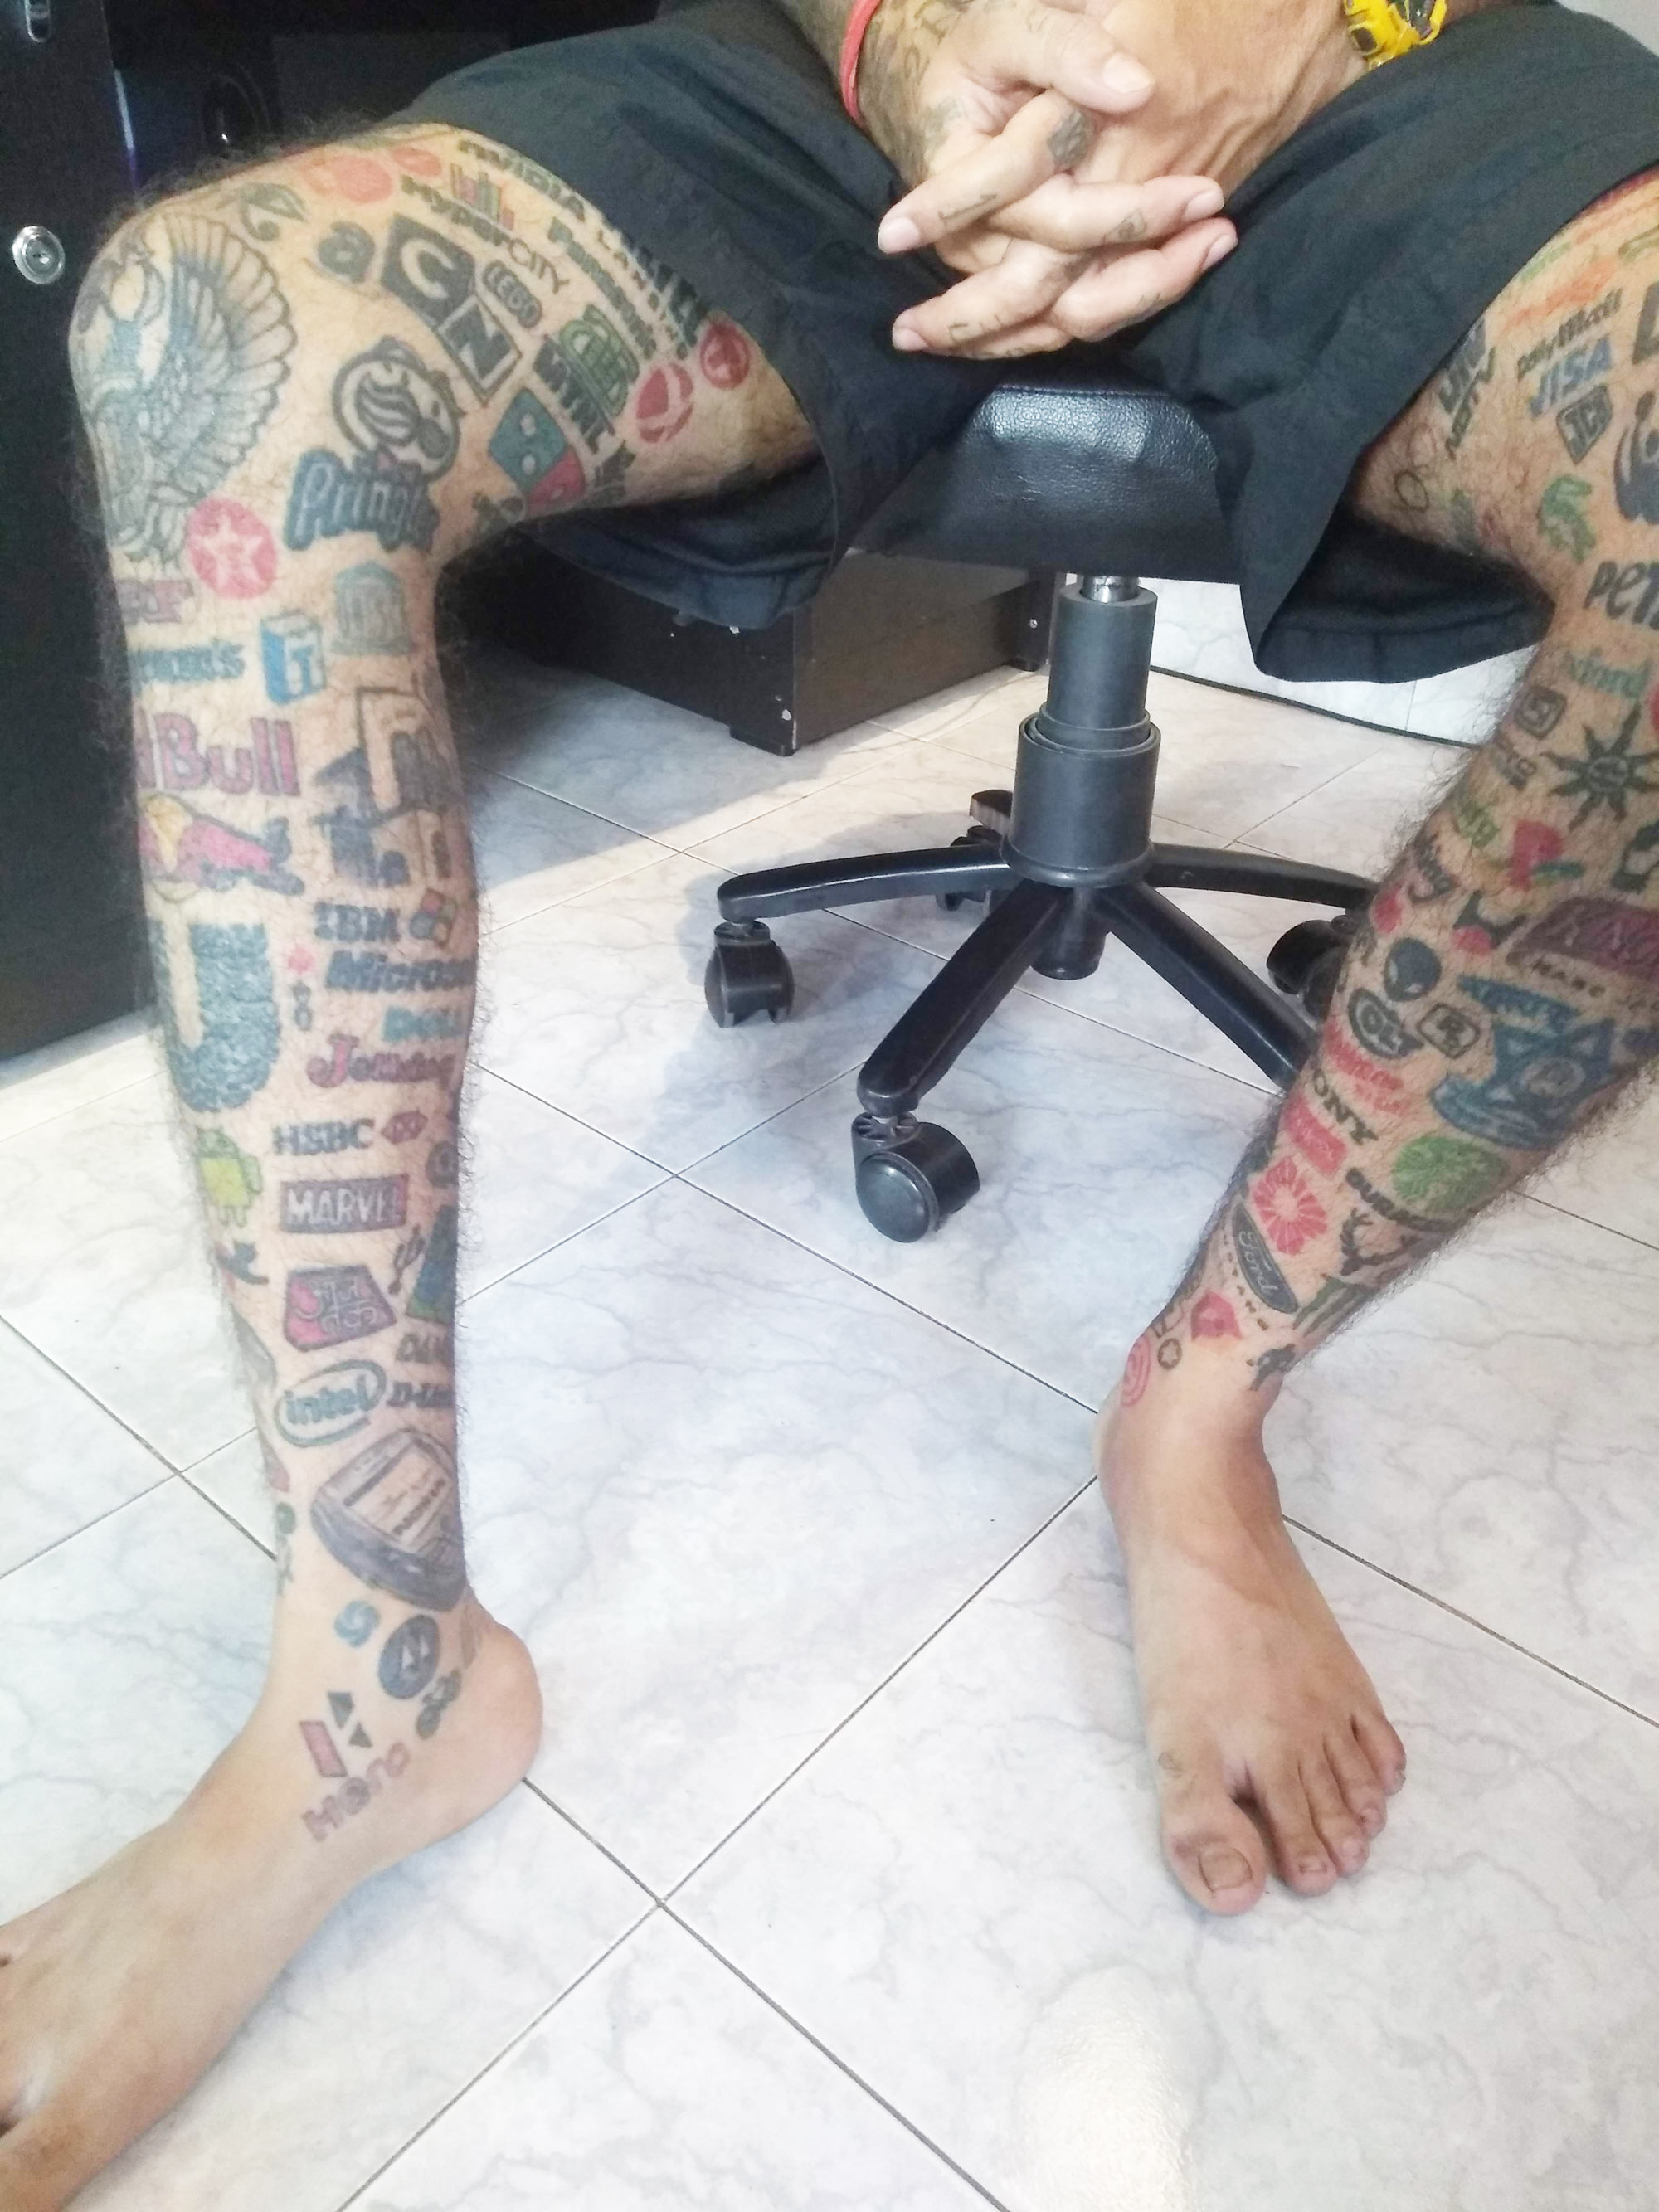 Meet the man with over 400 brand logo tattoos